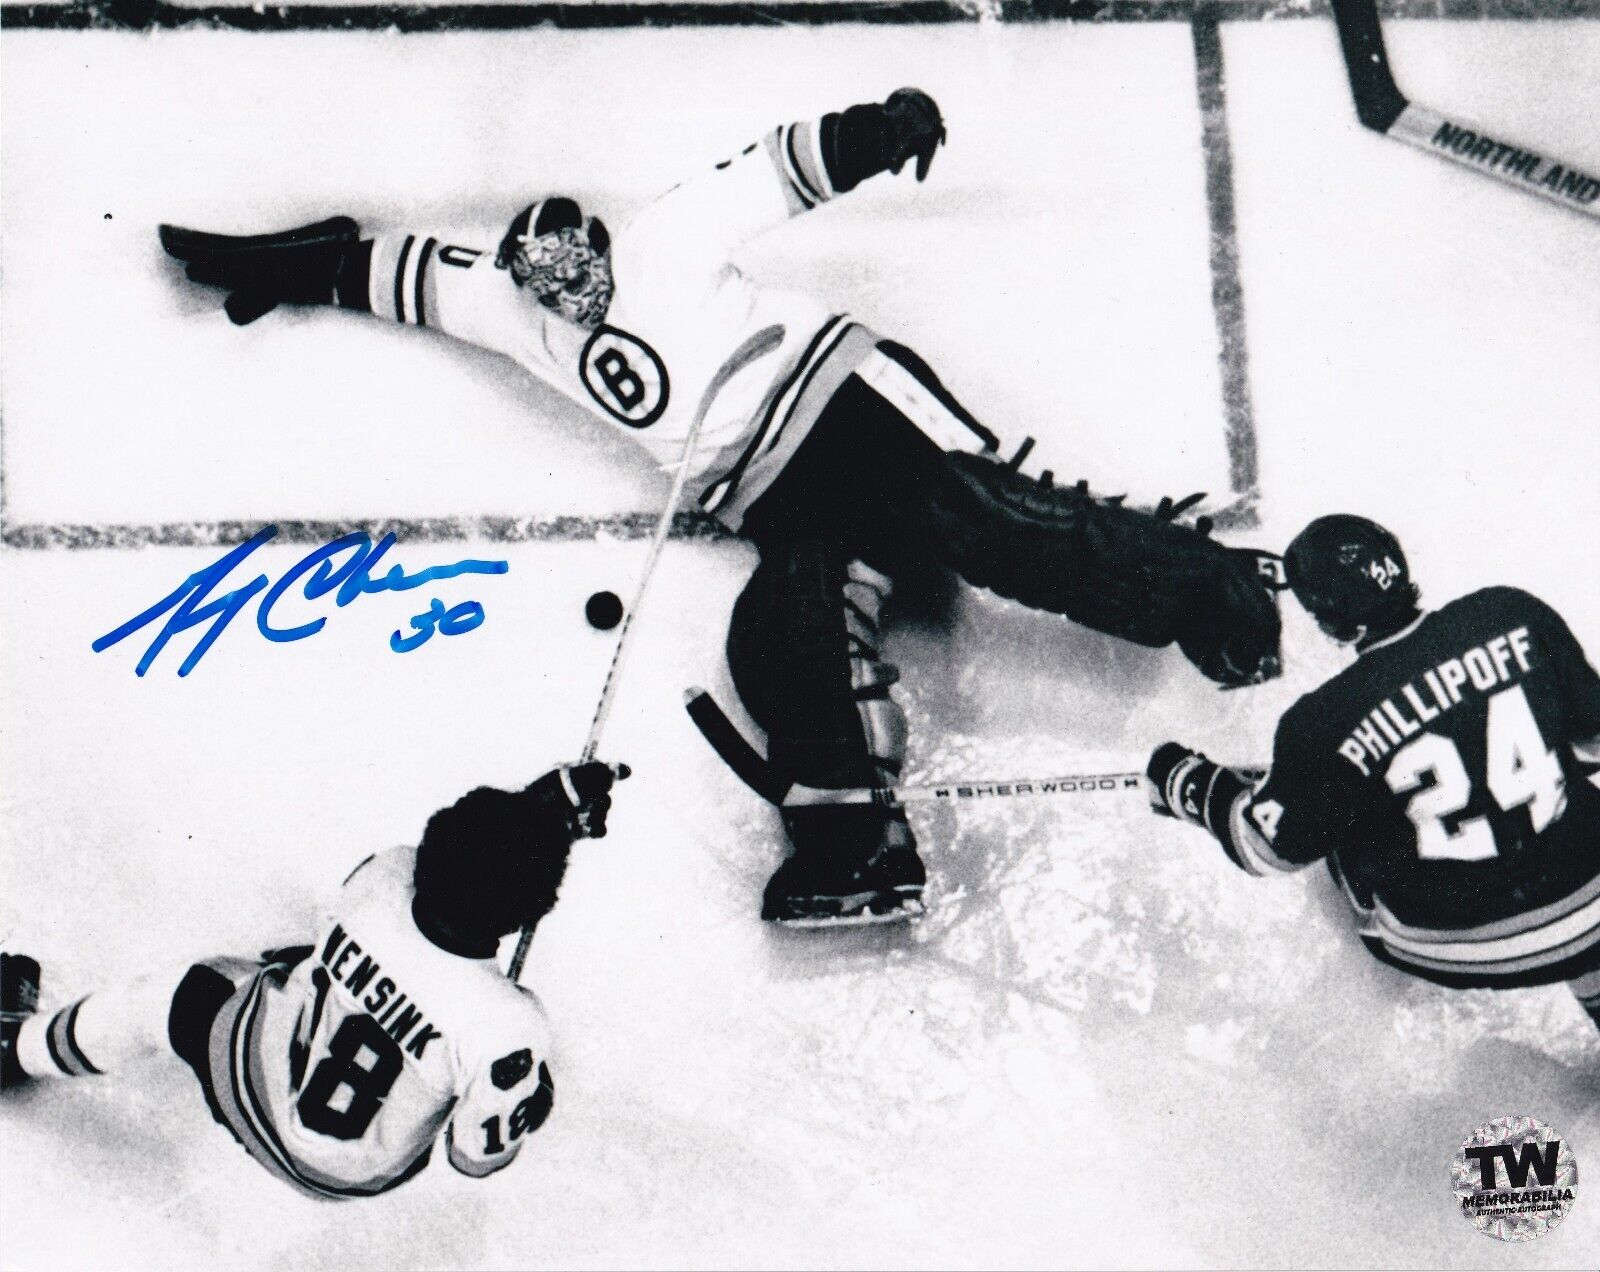 GERRY CHEEVERS Autographed Photo (8 x 10) - Boston Bruins - TW PRESTIGE